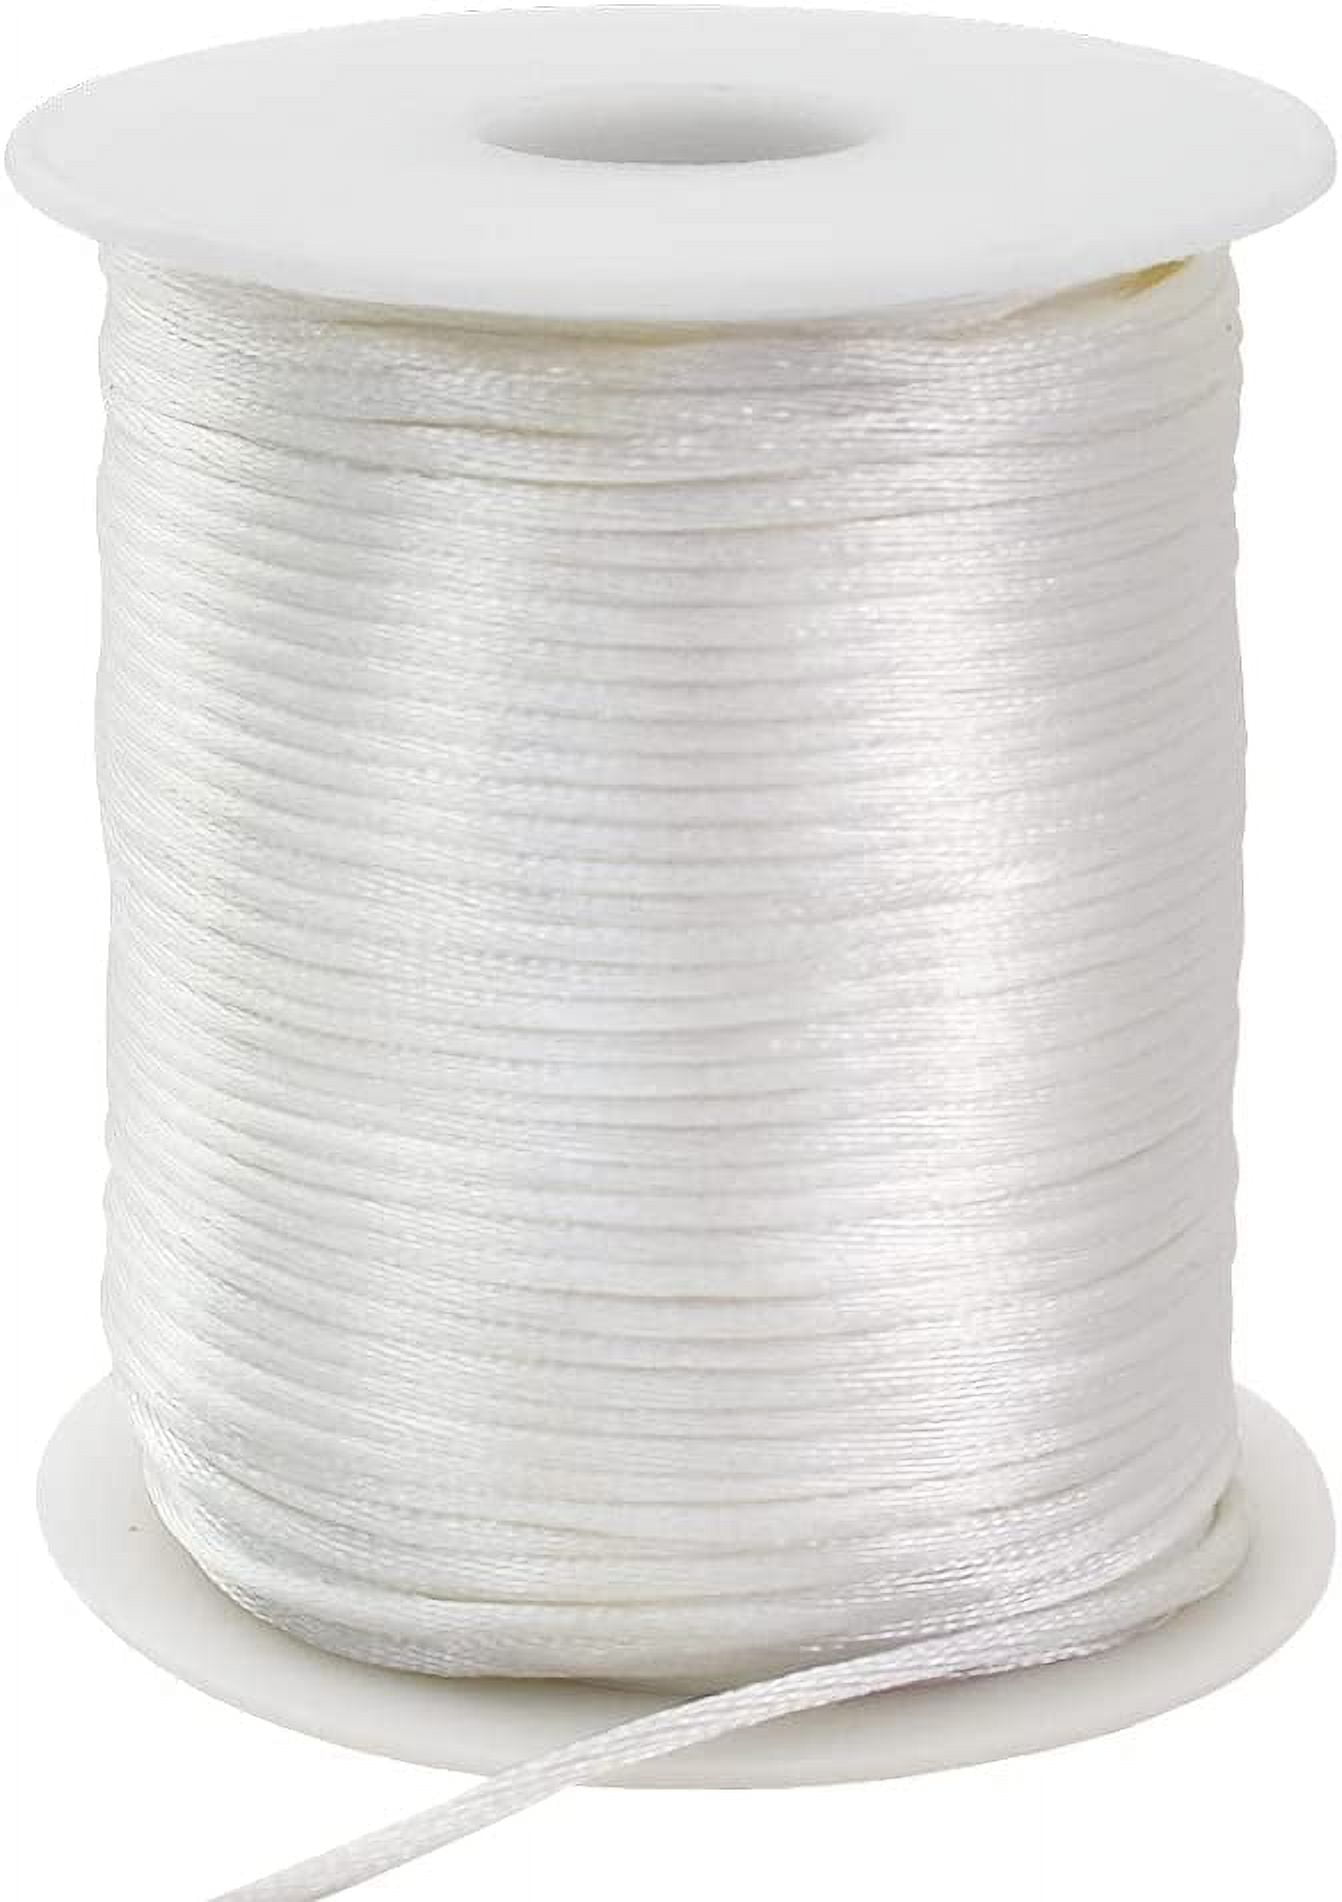 1mm x 100 Yards White Nylon Cord Satin String for Bracelet Jewelry Making Rattail  Macrame Waxed Trim Cord Necklace Bulk Beading Thread Kumihimo Chinese Knot  Craft 